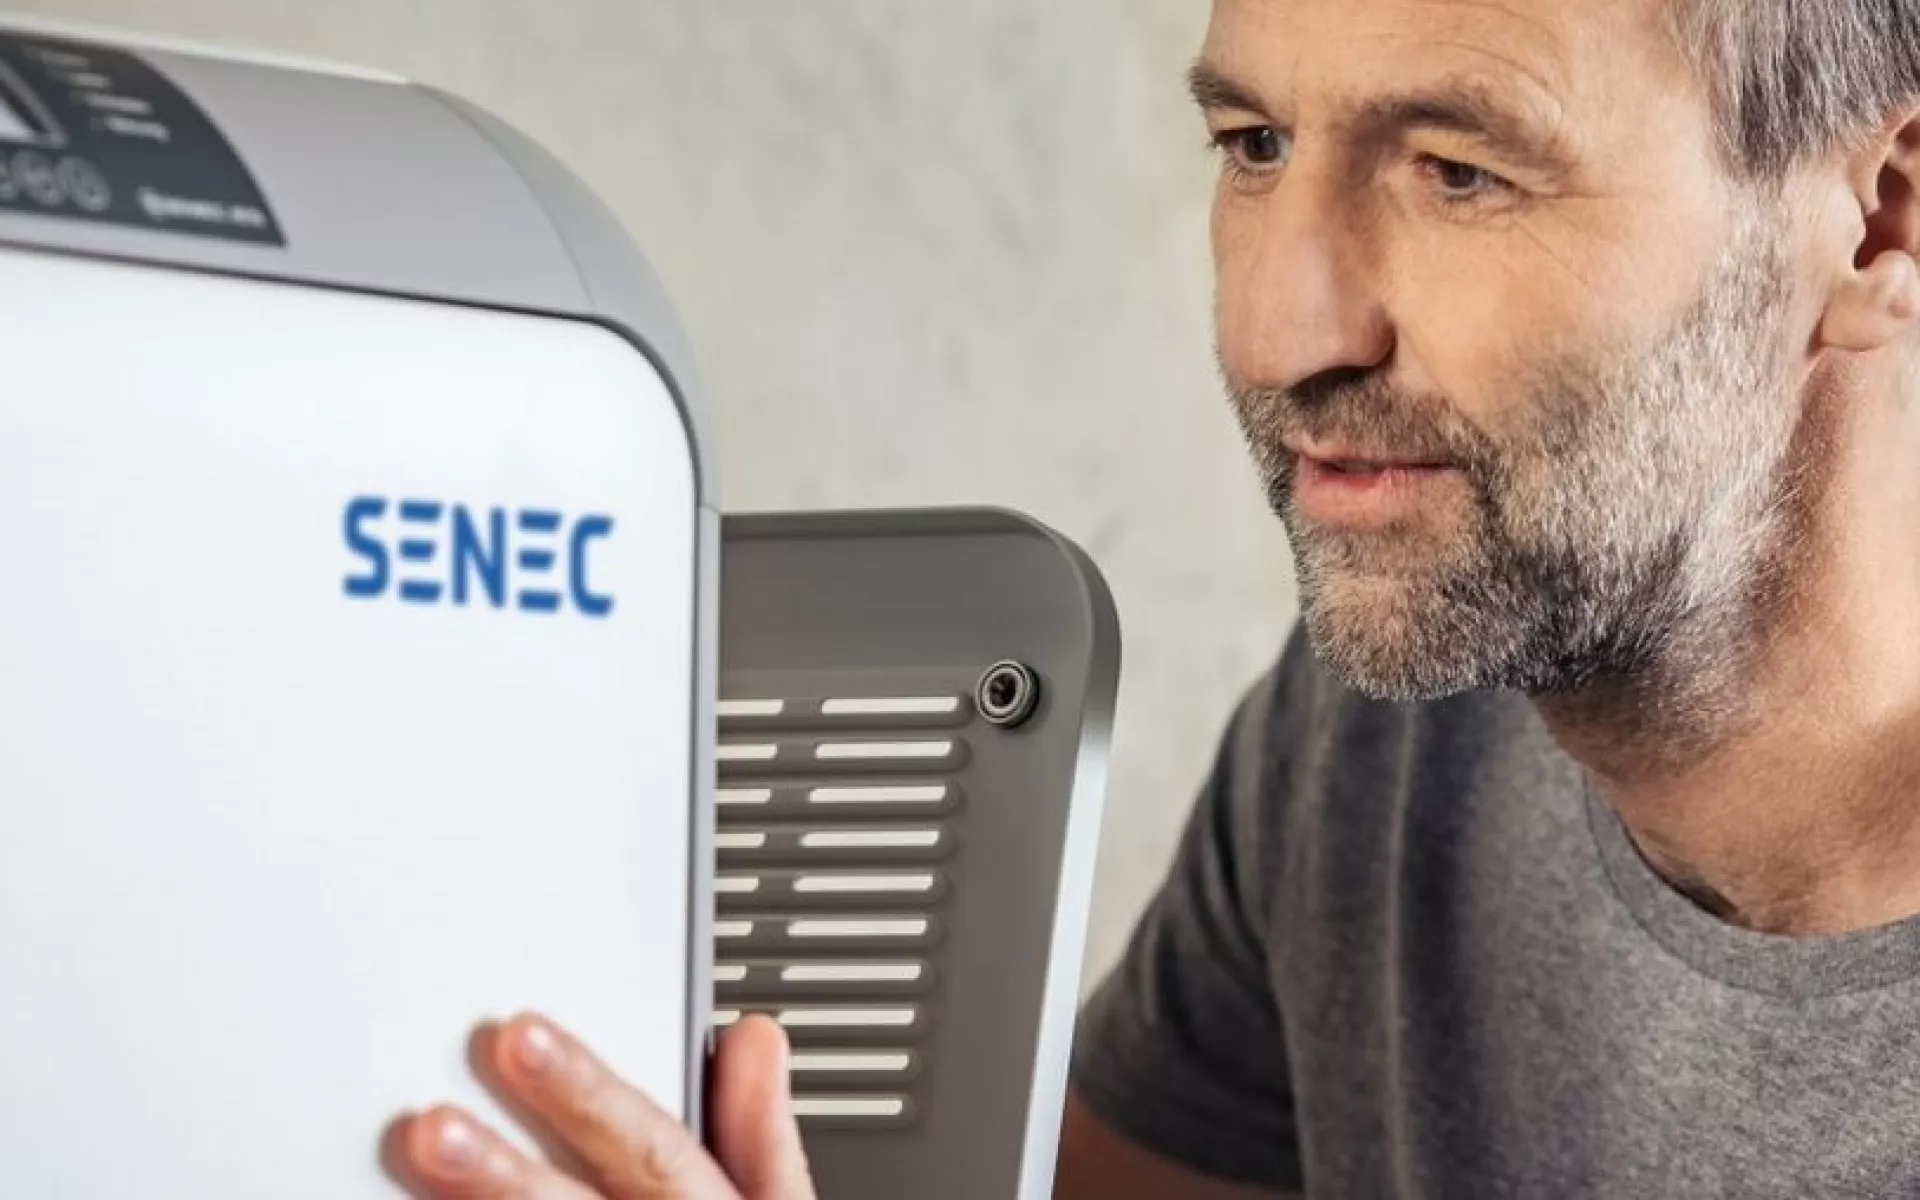 installer with SENEC.Home battery storage device